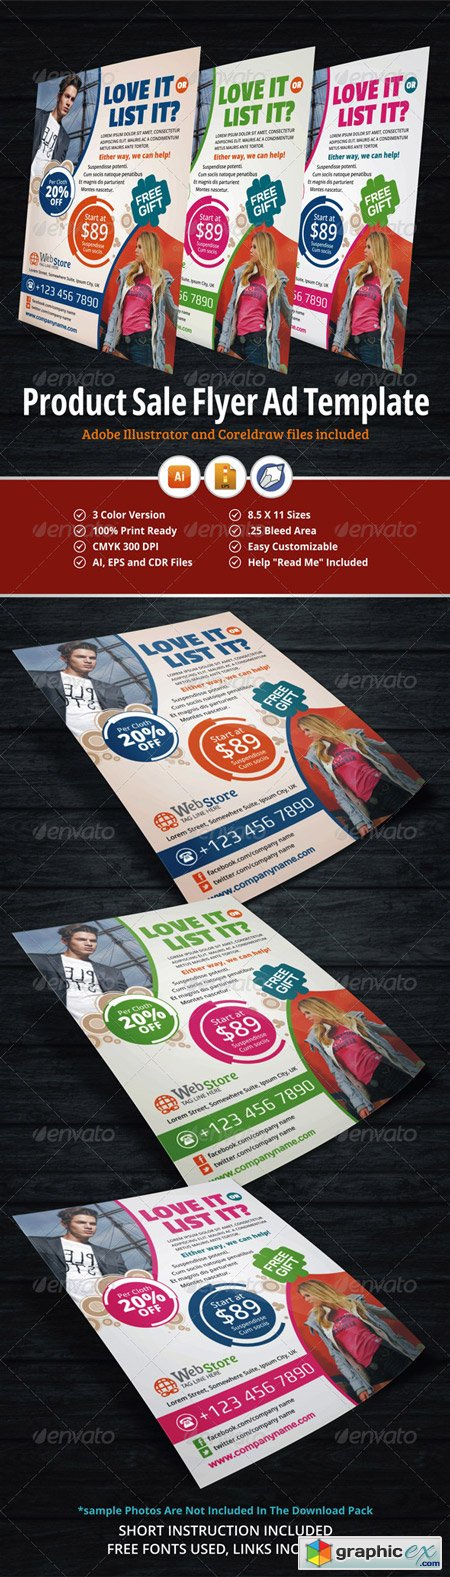 Product Sale Flyer Ad Template